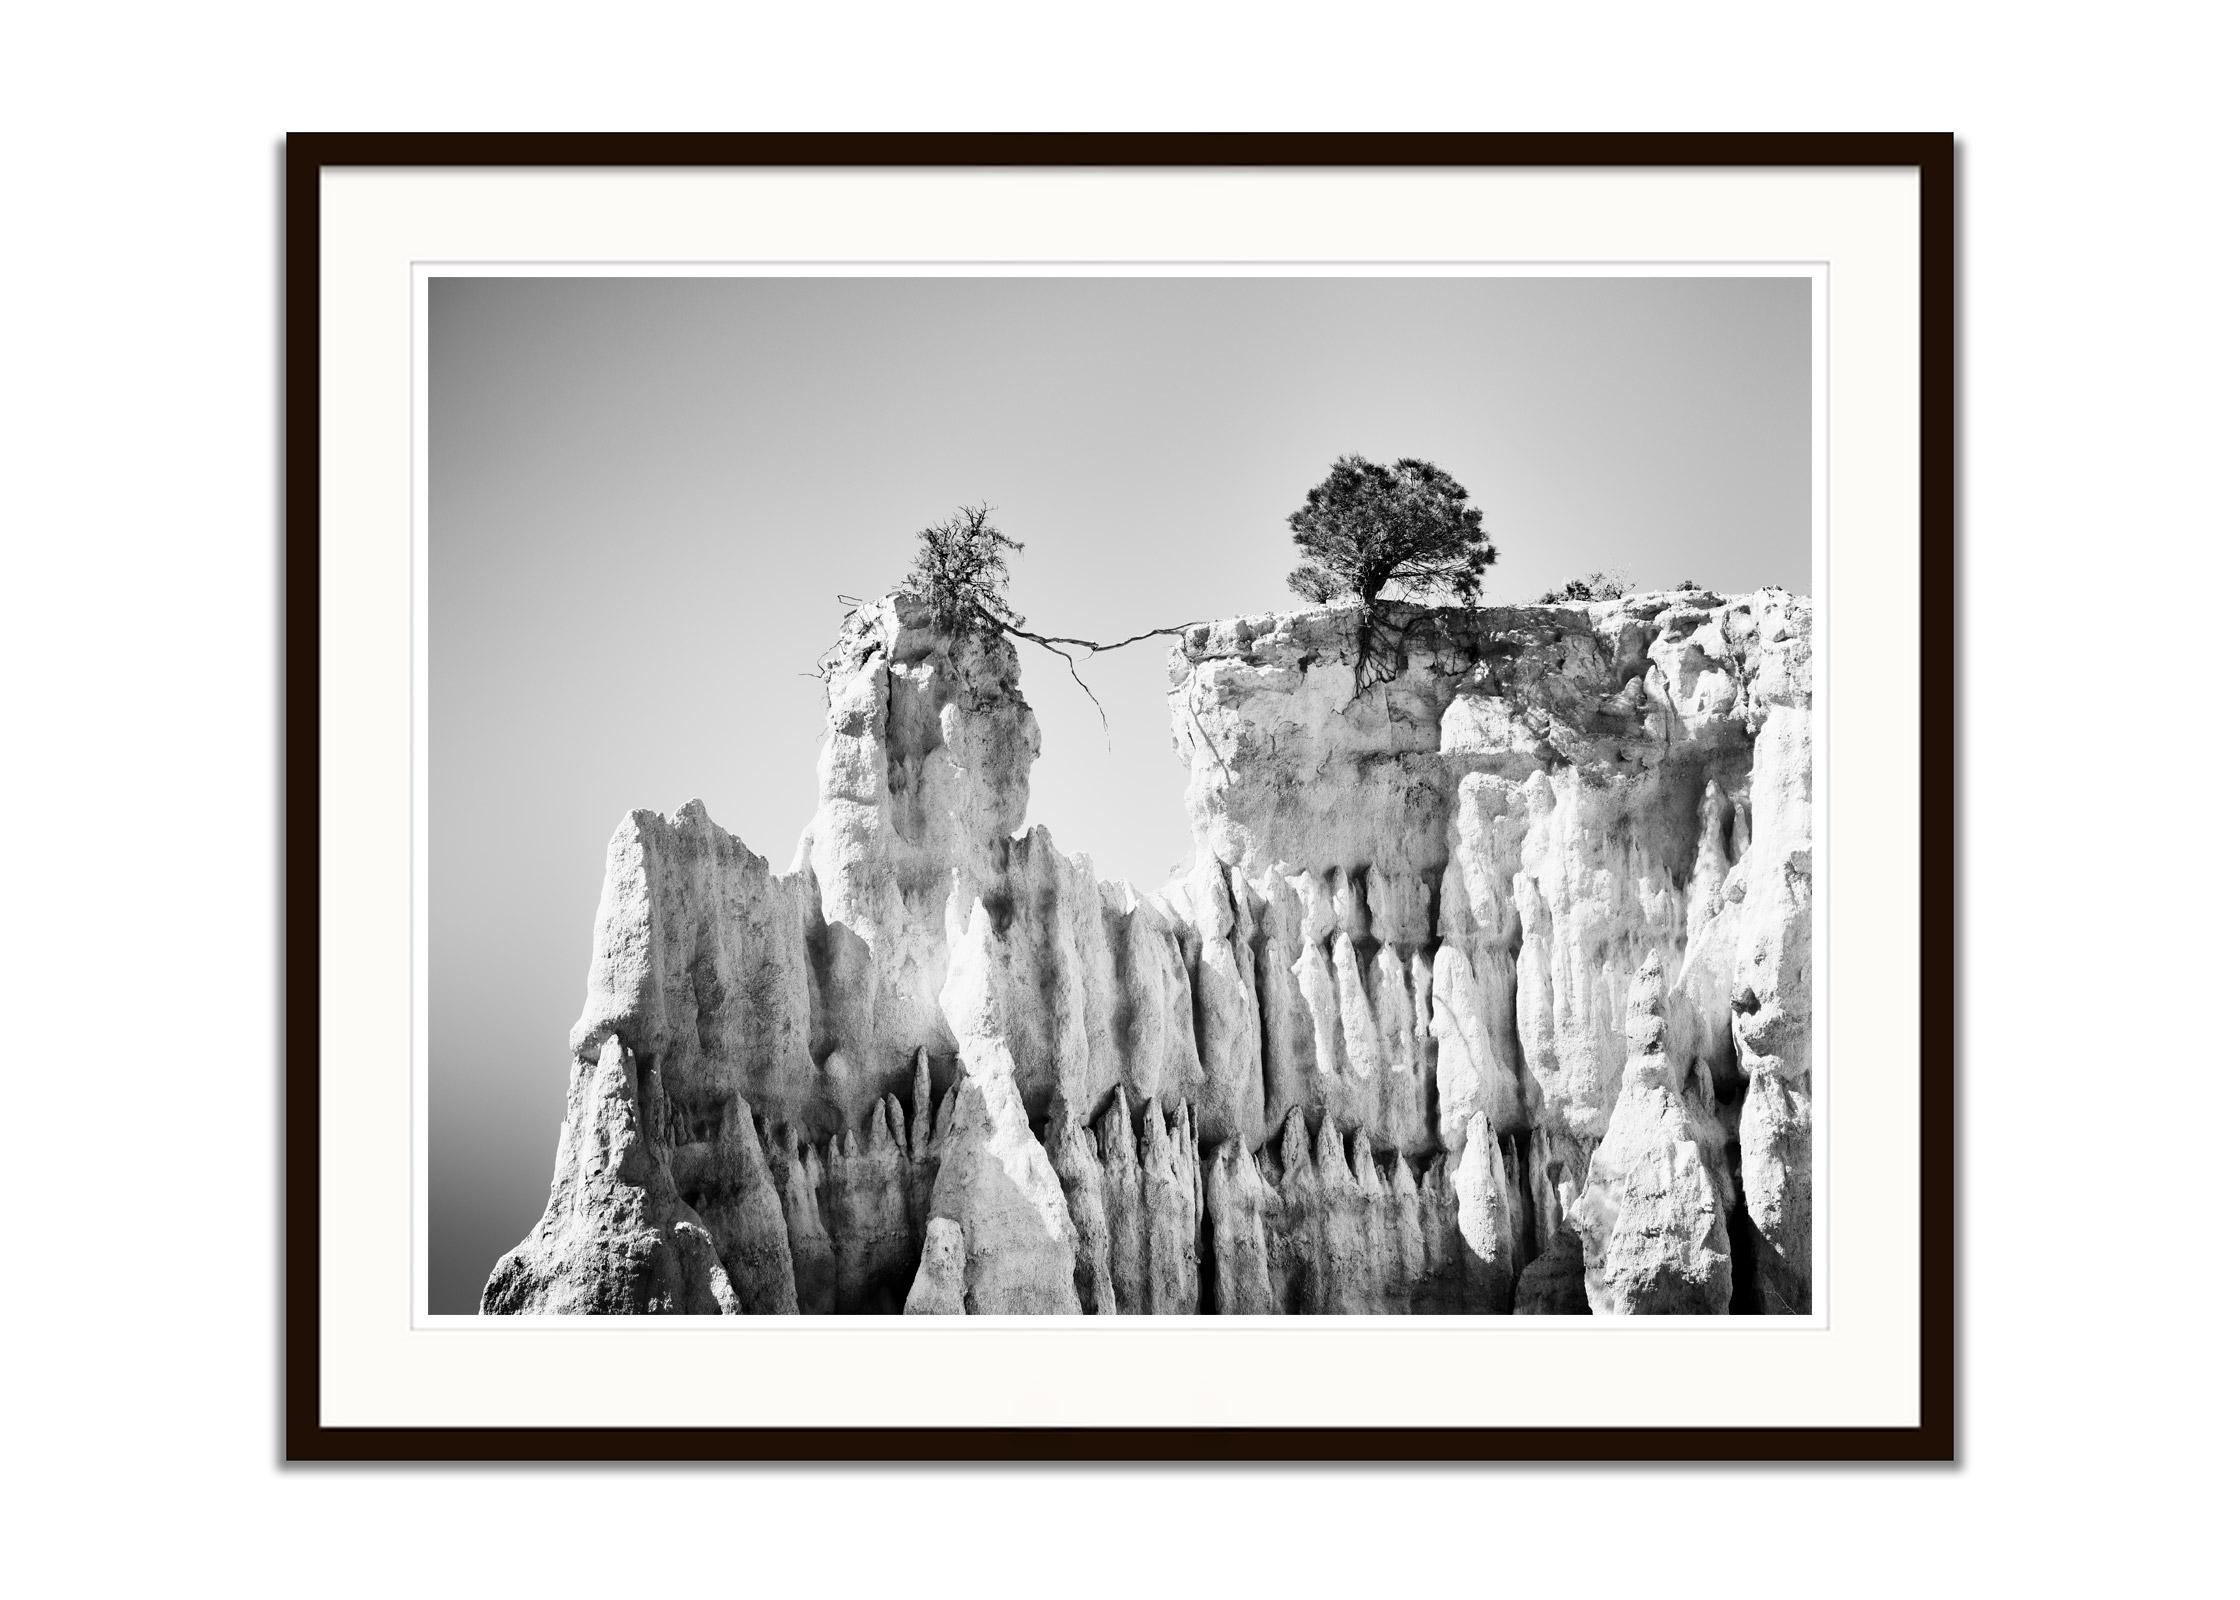 The Organs of Ille-sur-Tet, sandstone, black and white photography, landscape - Gray Black and White Photograph by Gerald Berghammer